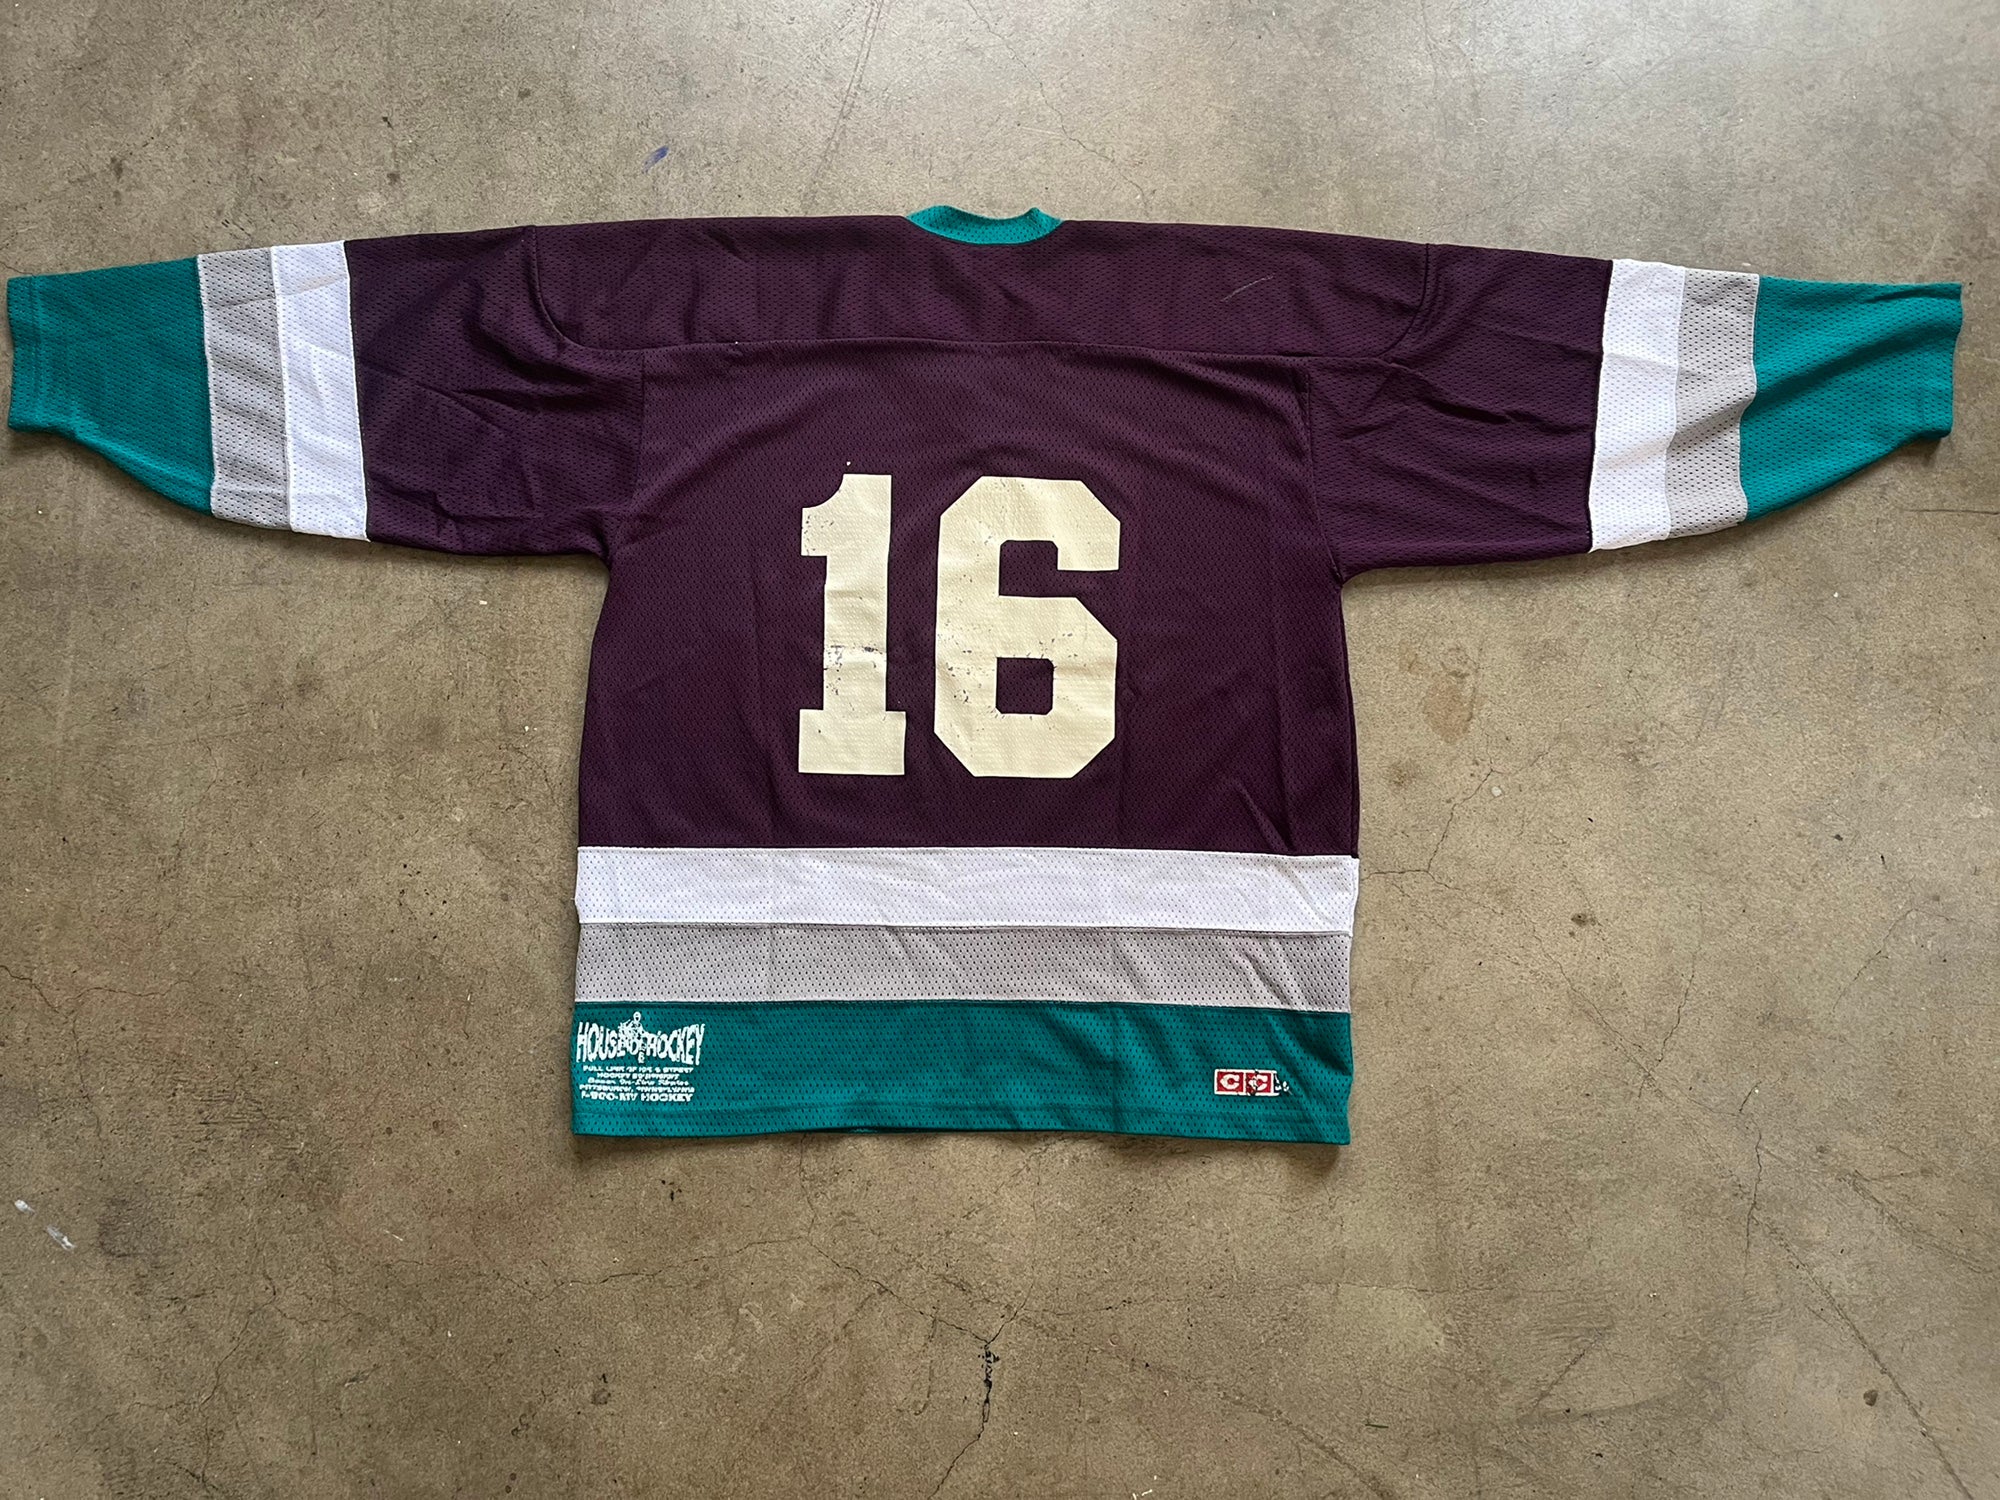 Wichita Thunder on X: Here are the Hockey is for Everyone jerseys